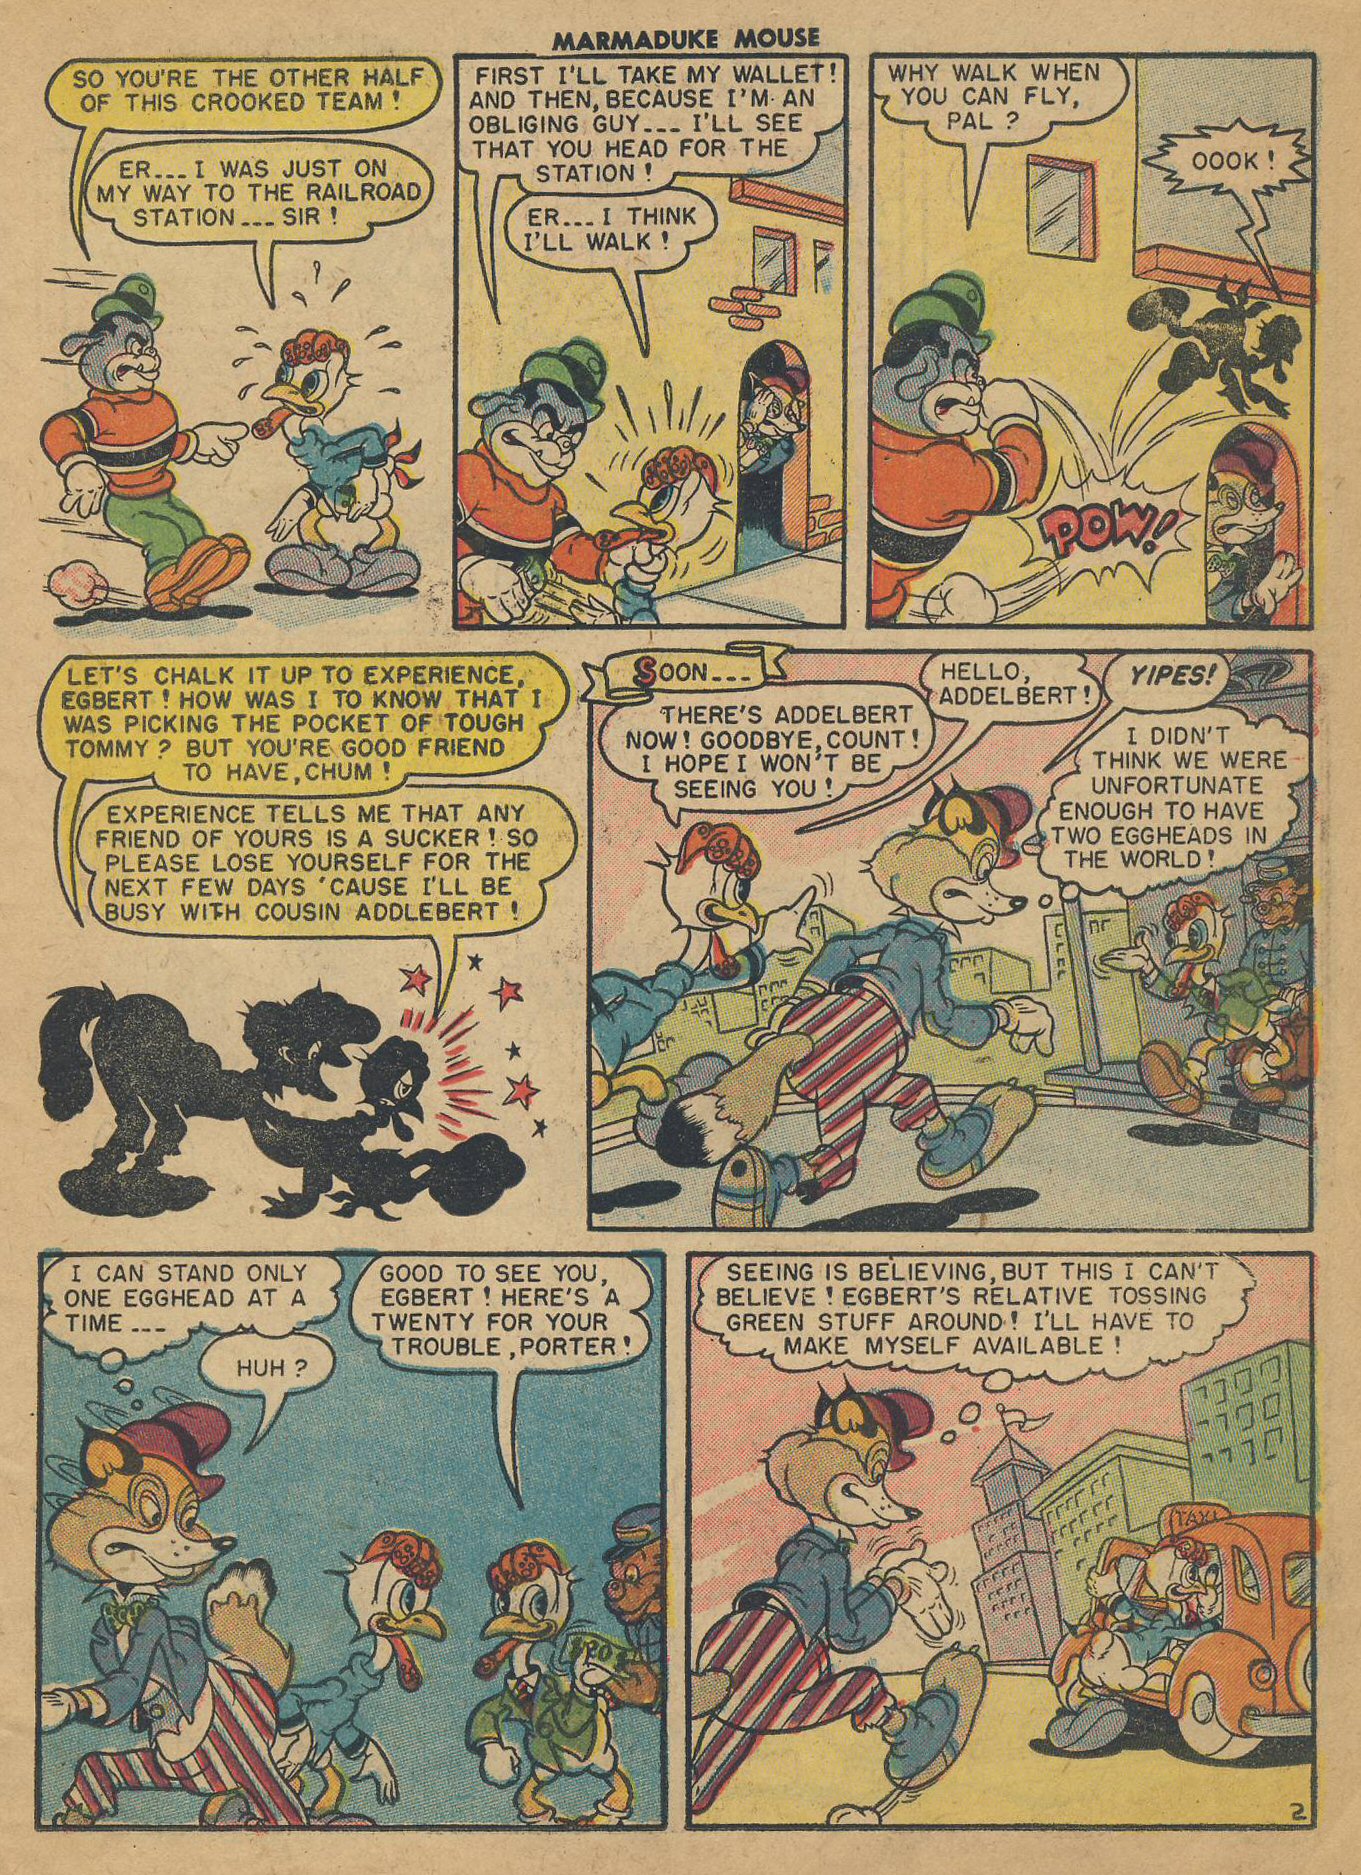 Read online Marmaduke Mouse comic -  Issue #54 - 11